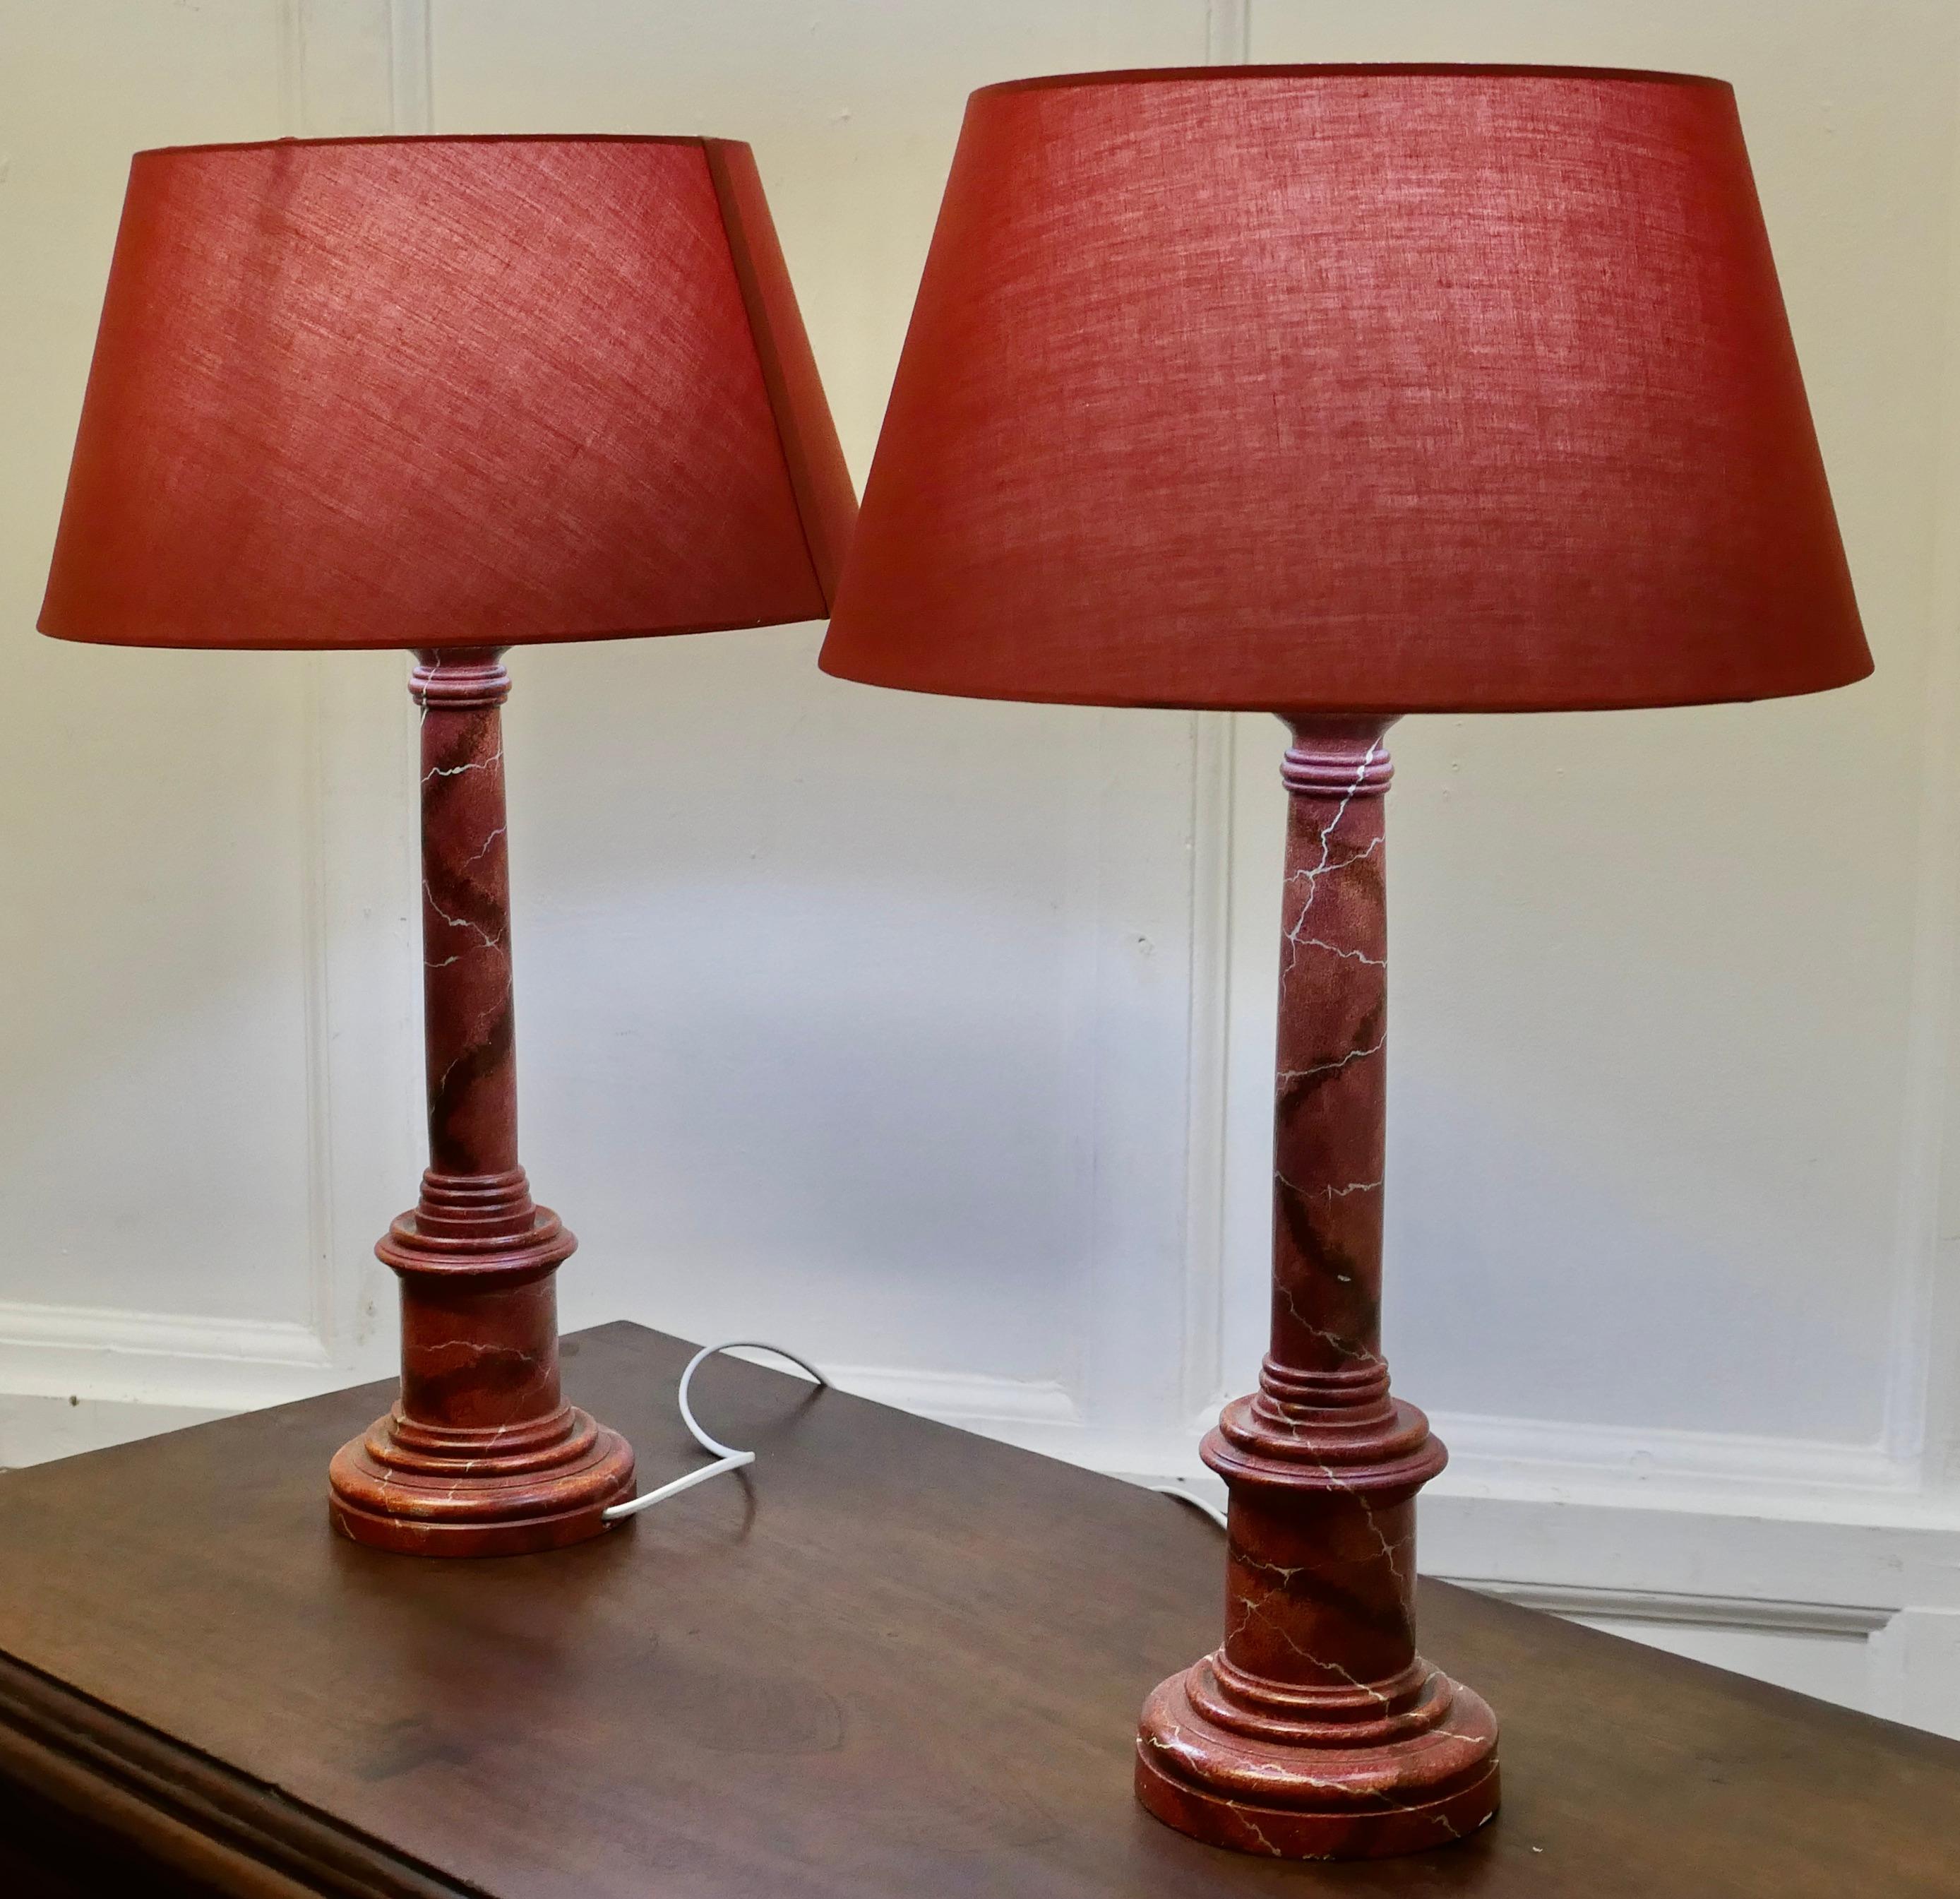 A Pair of Tall Simulated Marble Bedside Lamps with Shades    For Sale 1